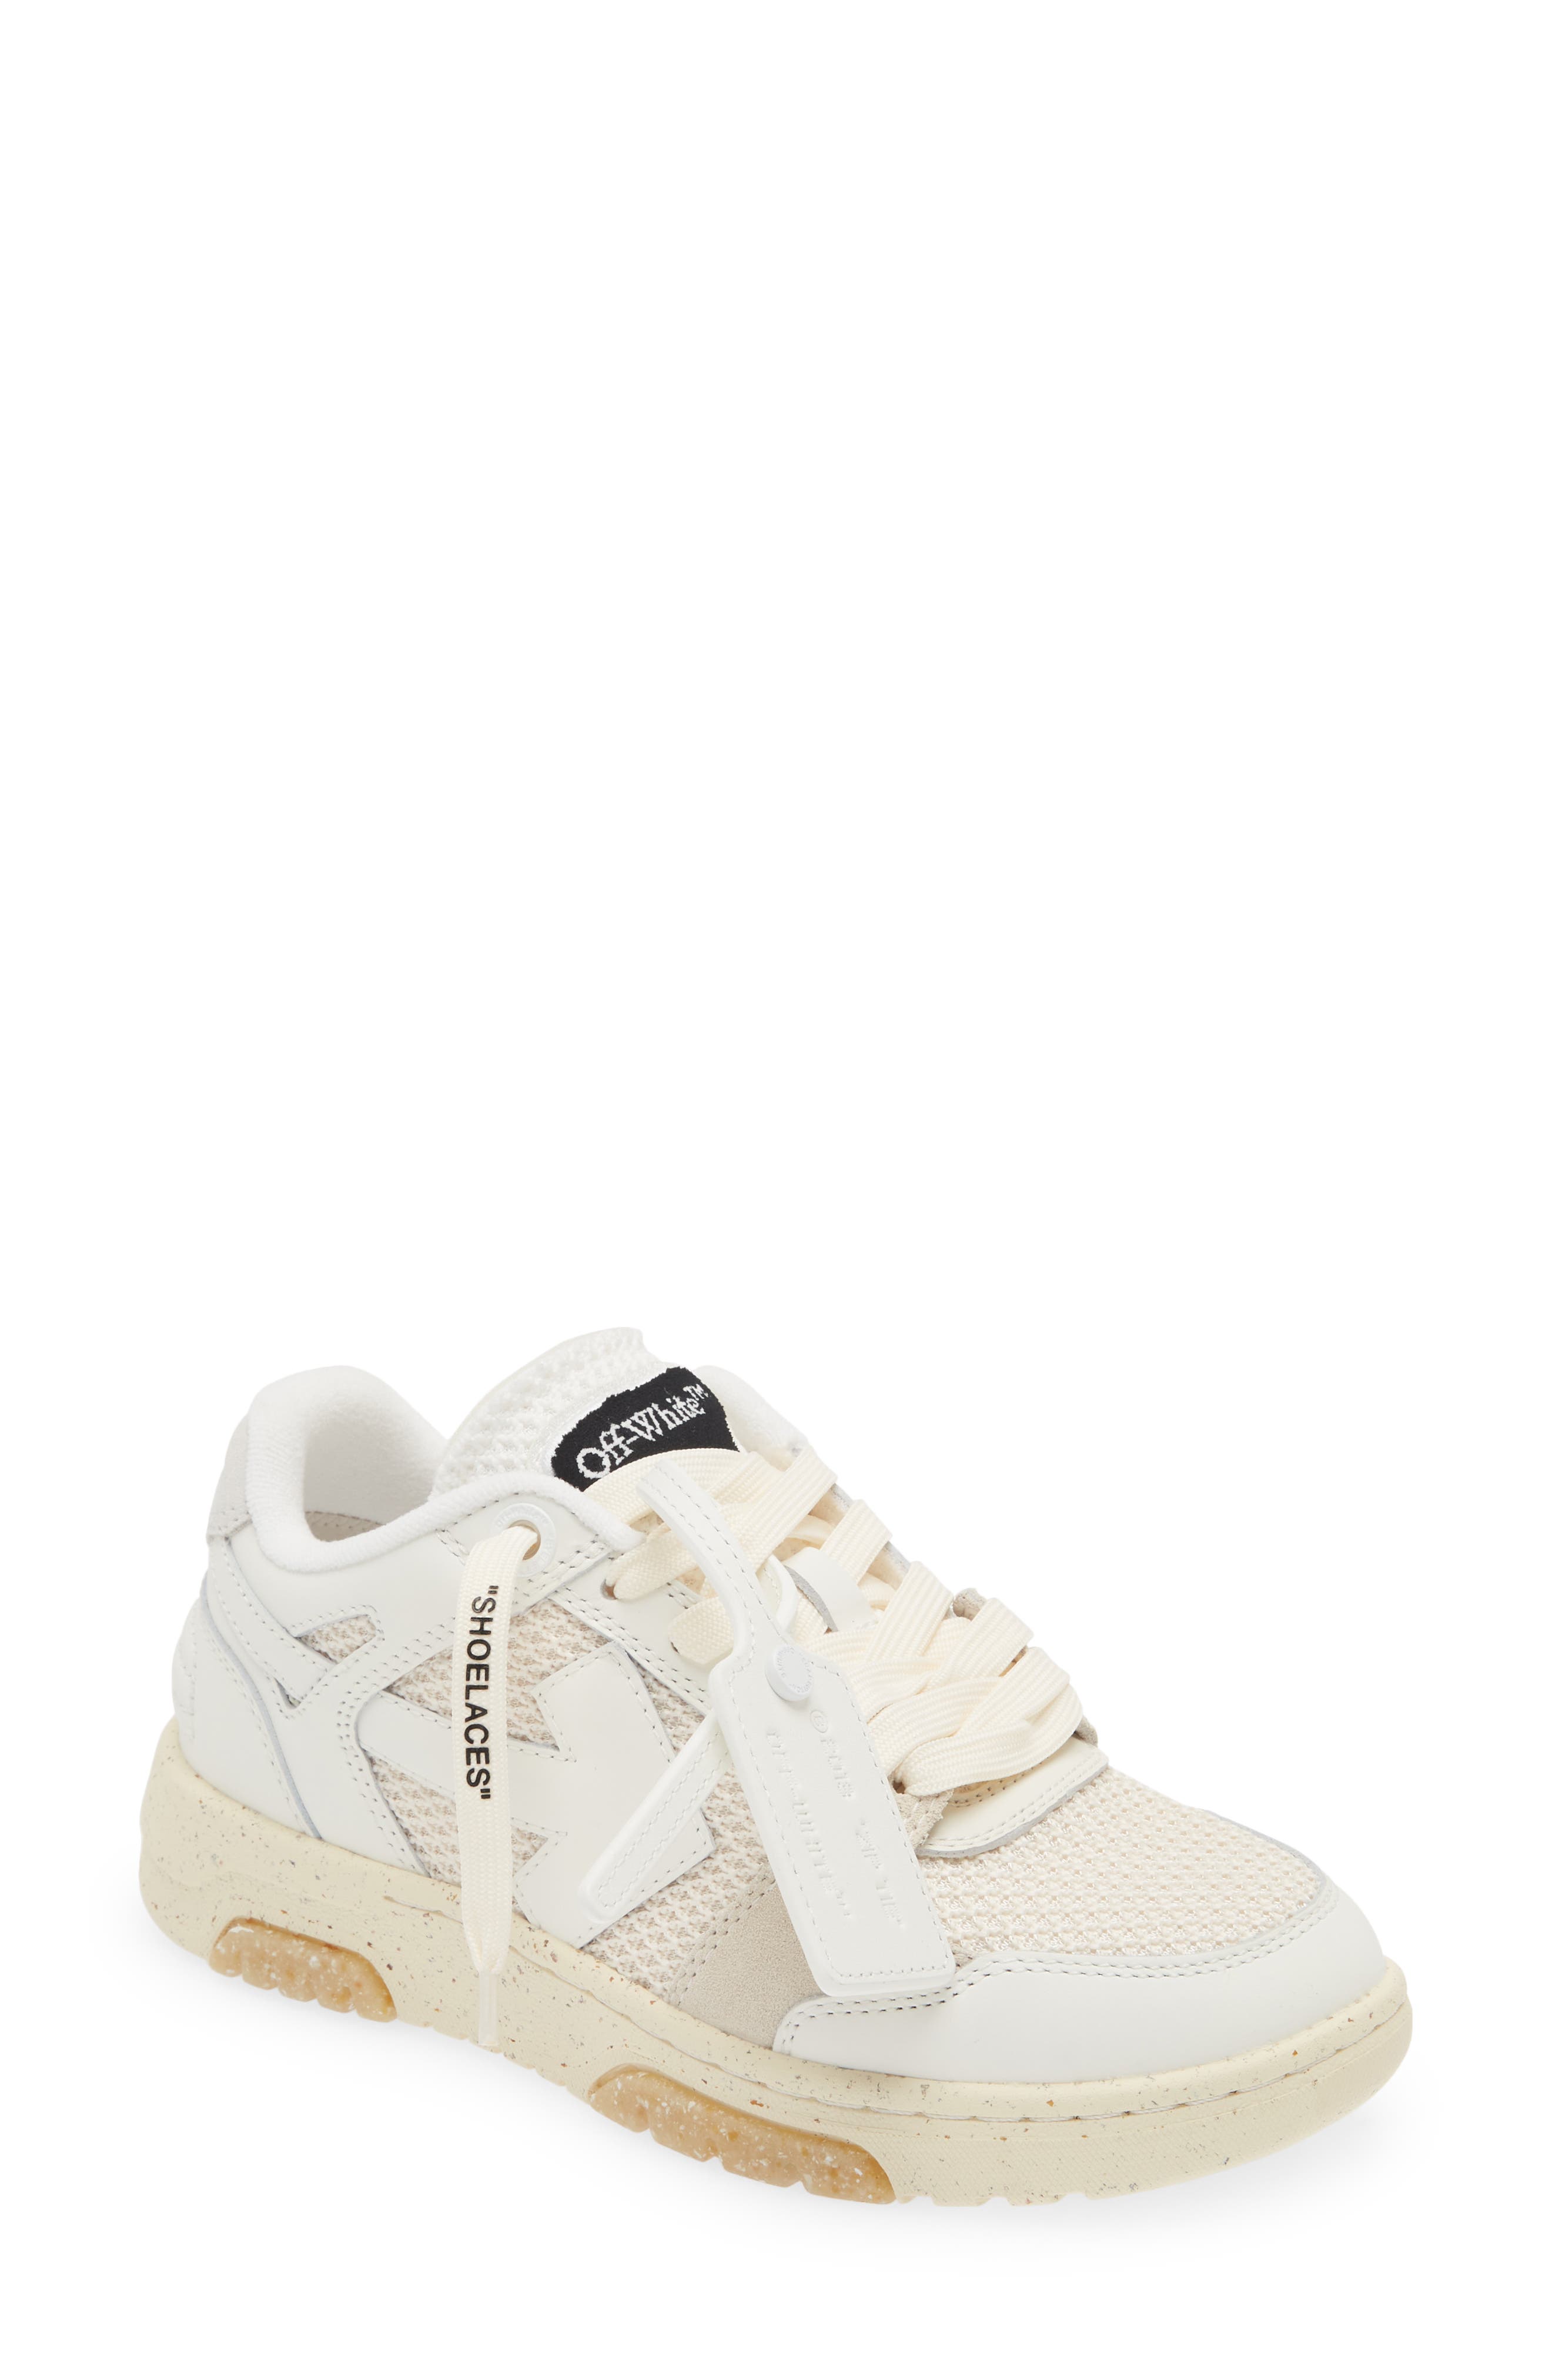 OFF-WHITE Out Of Office For Walking White Peach (Women#39;s)